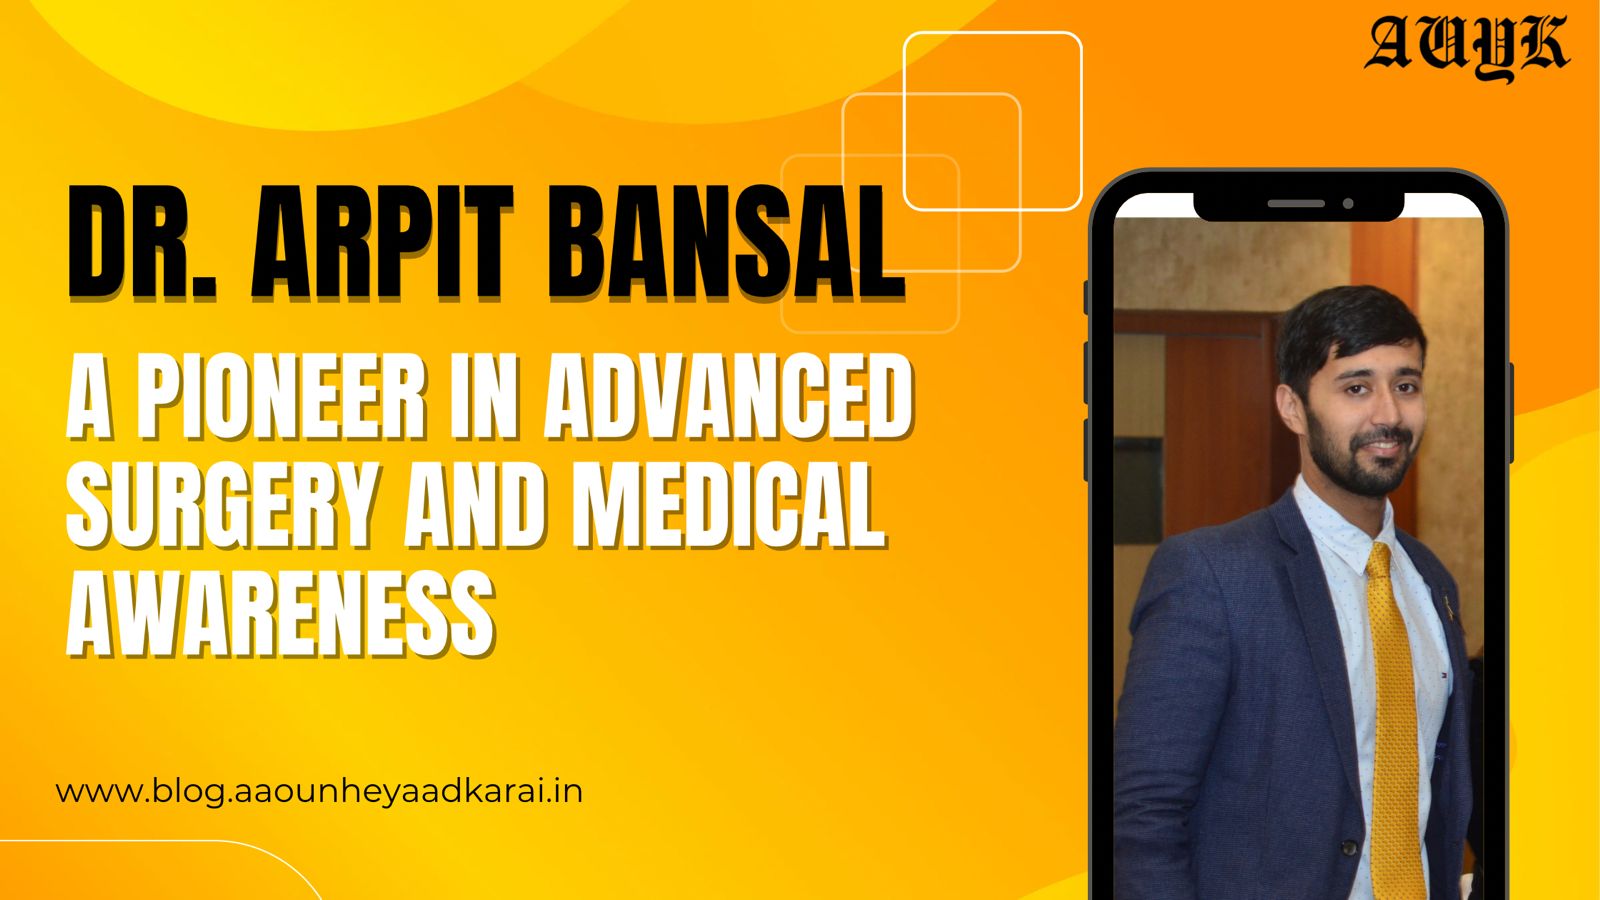 Dr. Arpit Bansal A Pioneer in Advanced Surgery and Medical Awareness